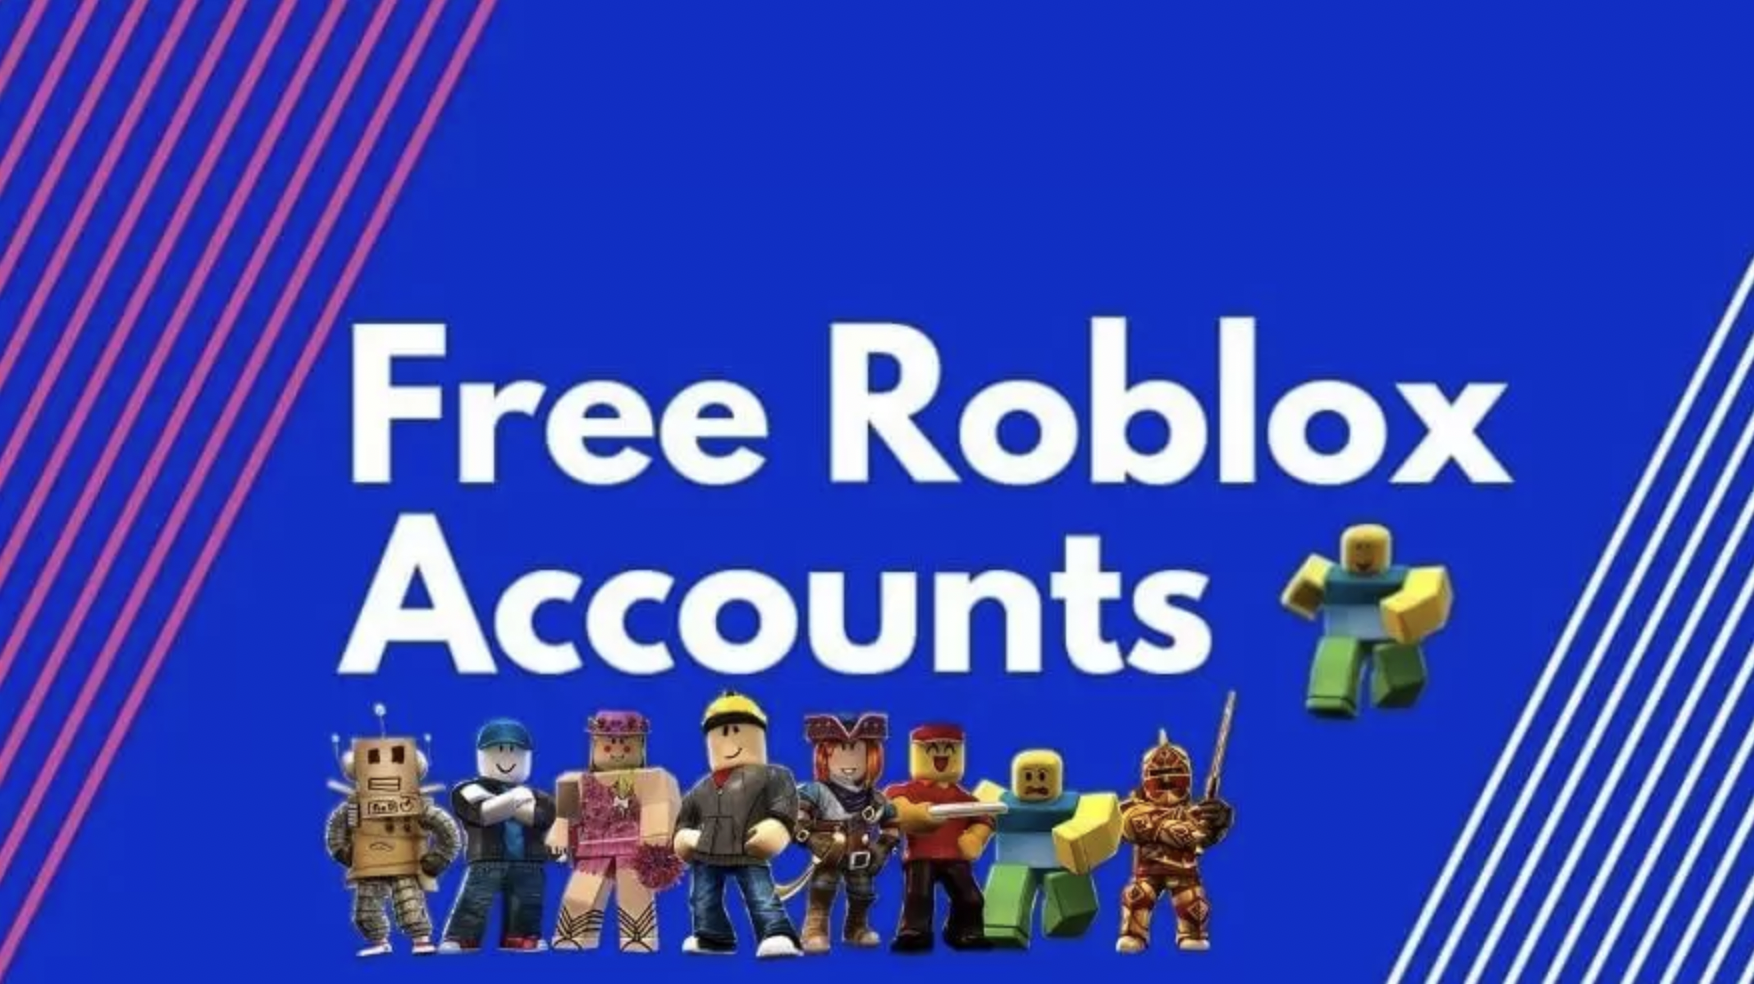 Free Roblox Accounts with Passwords | Robux with 100K | Unlimited Money